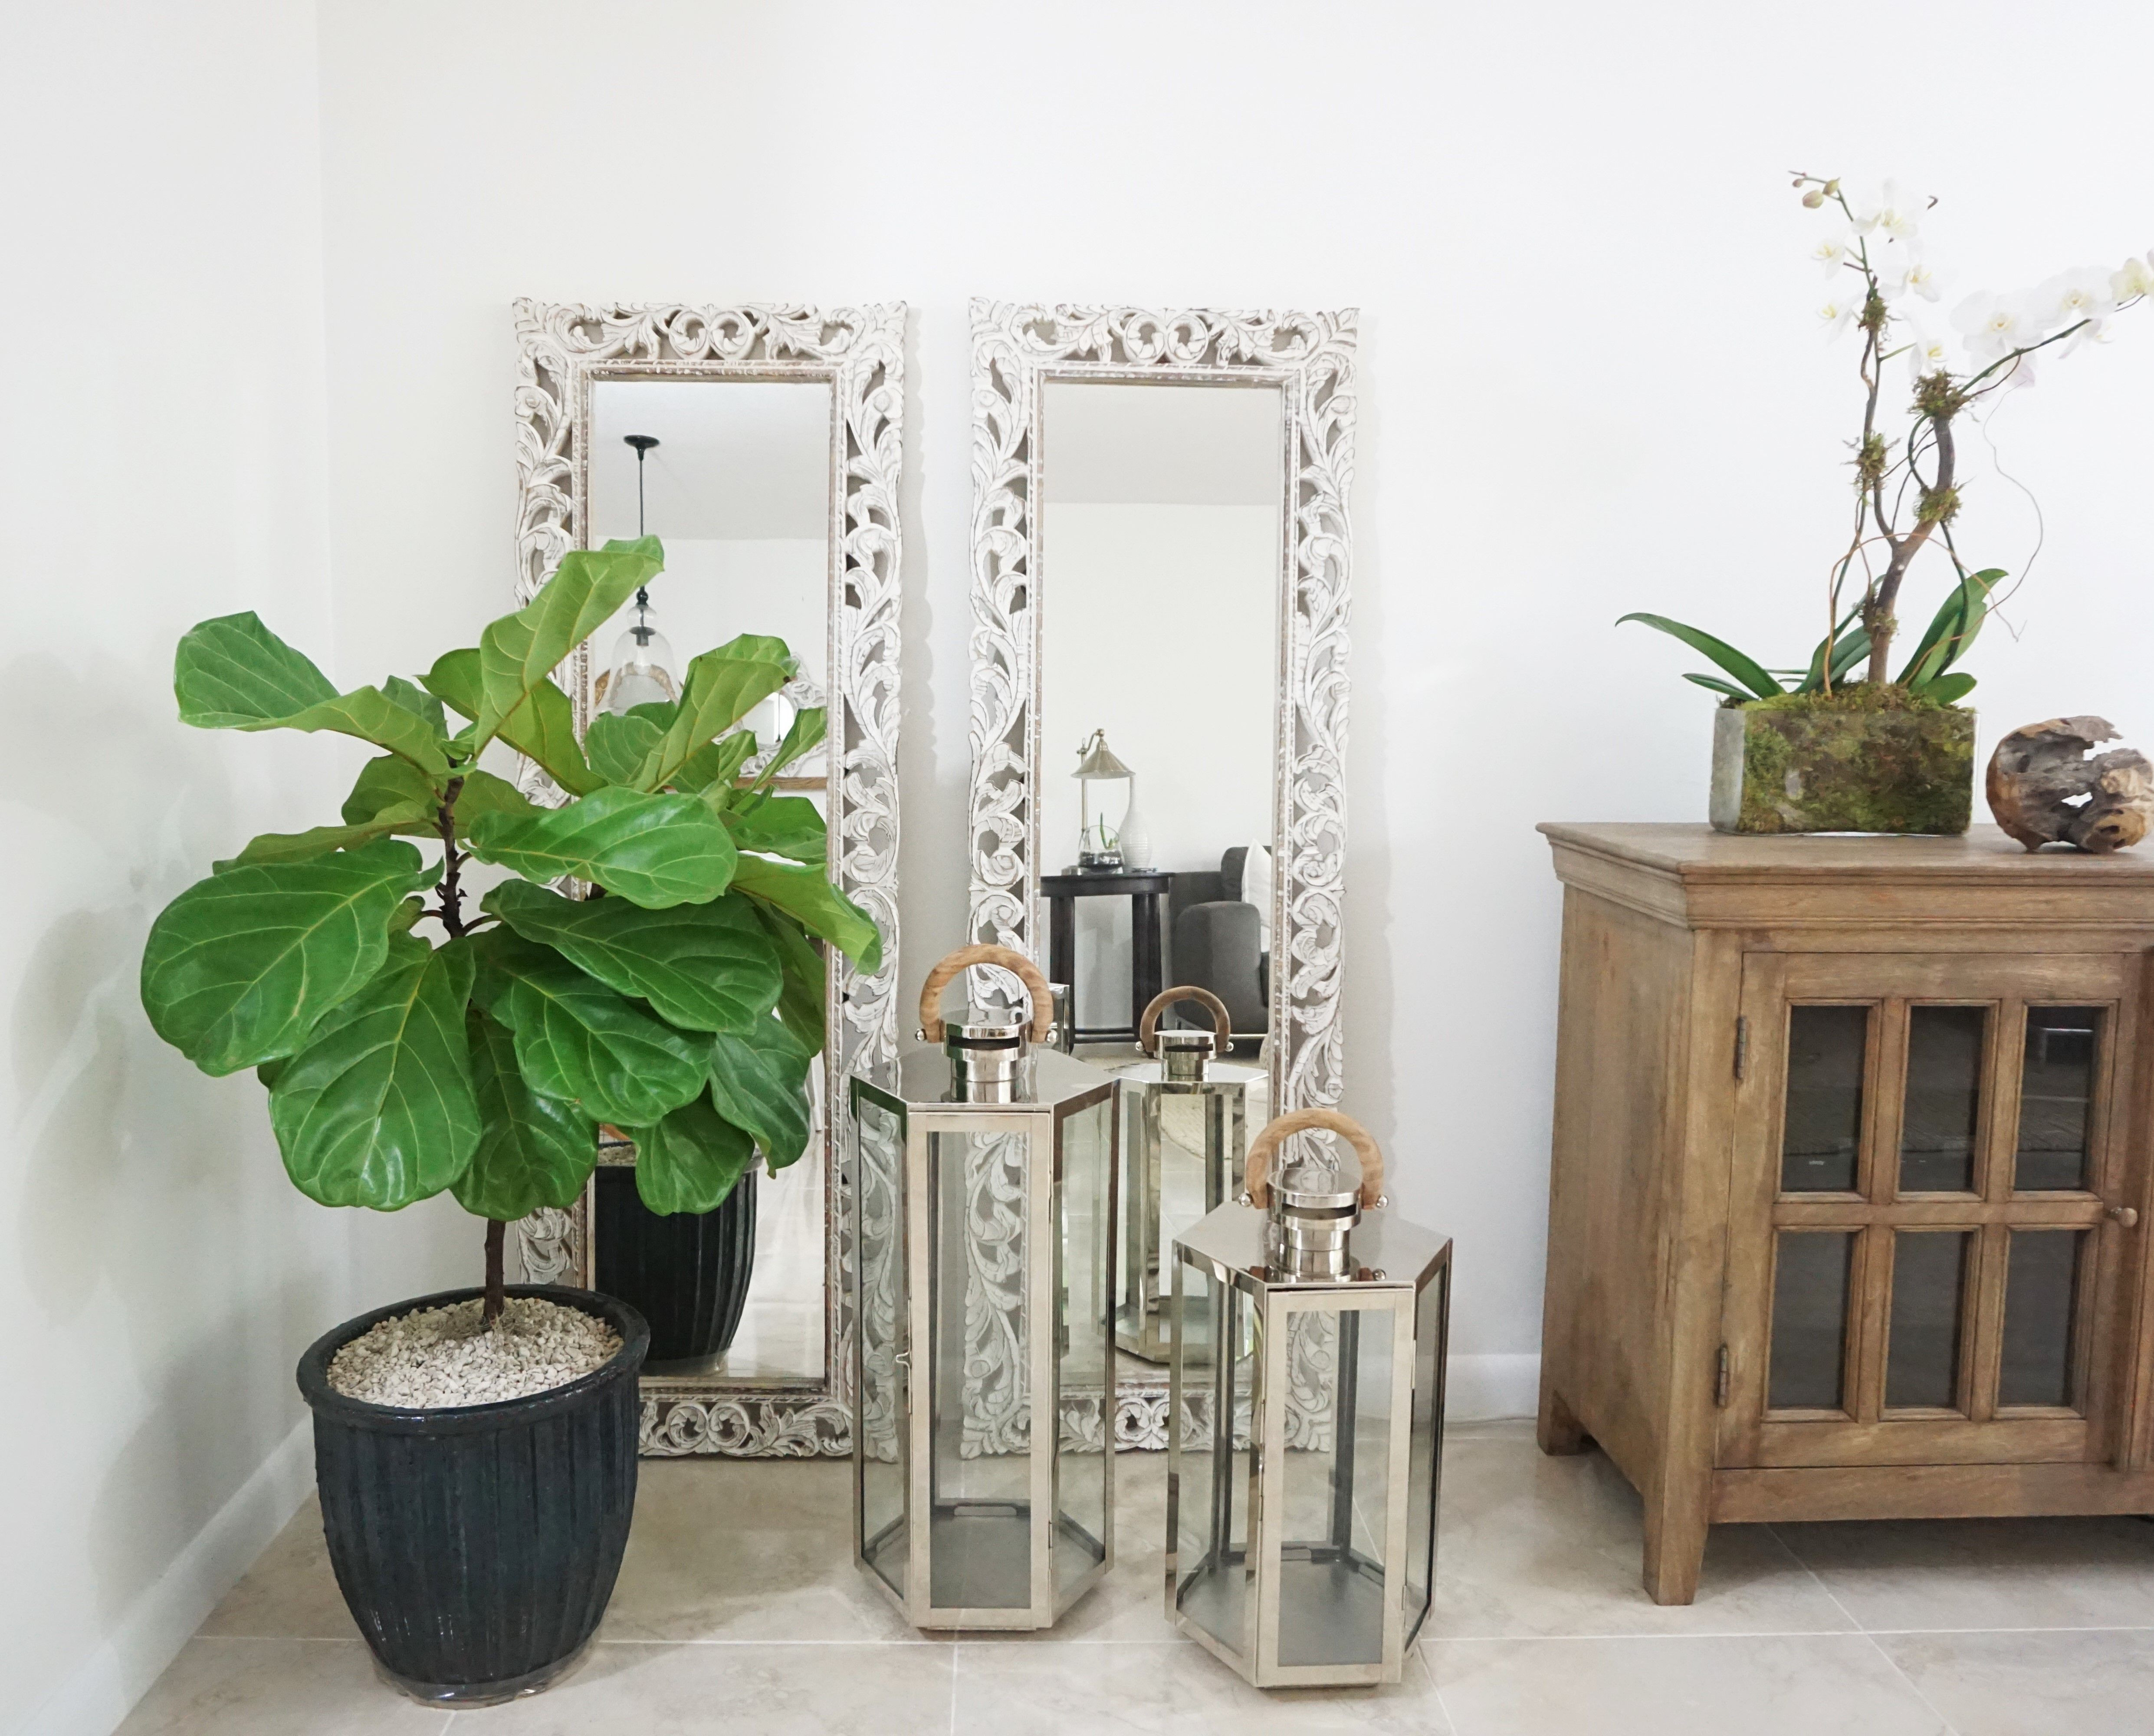 mirrored floor vase of dmaree home interior design home decor lanterns orchid with dmaree home interior design home decor lanterns orchid arrangement drift wood